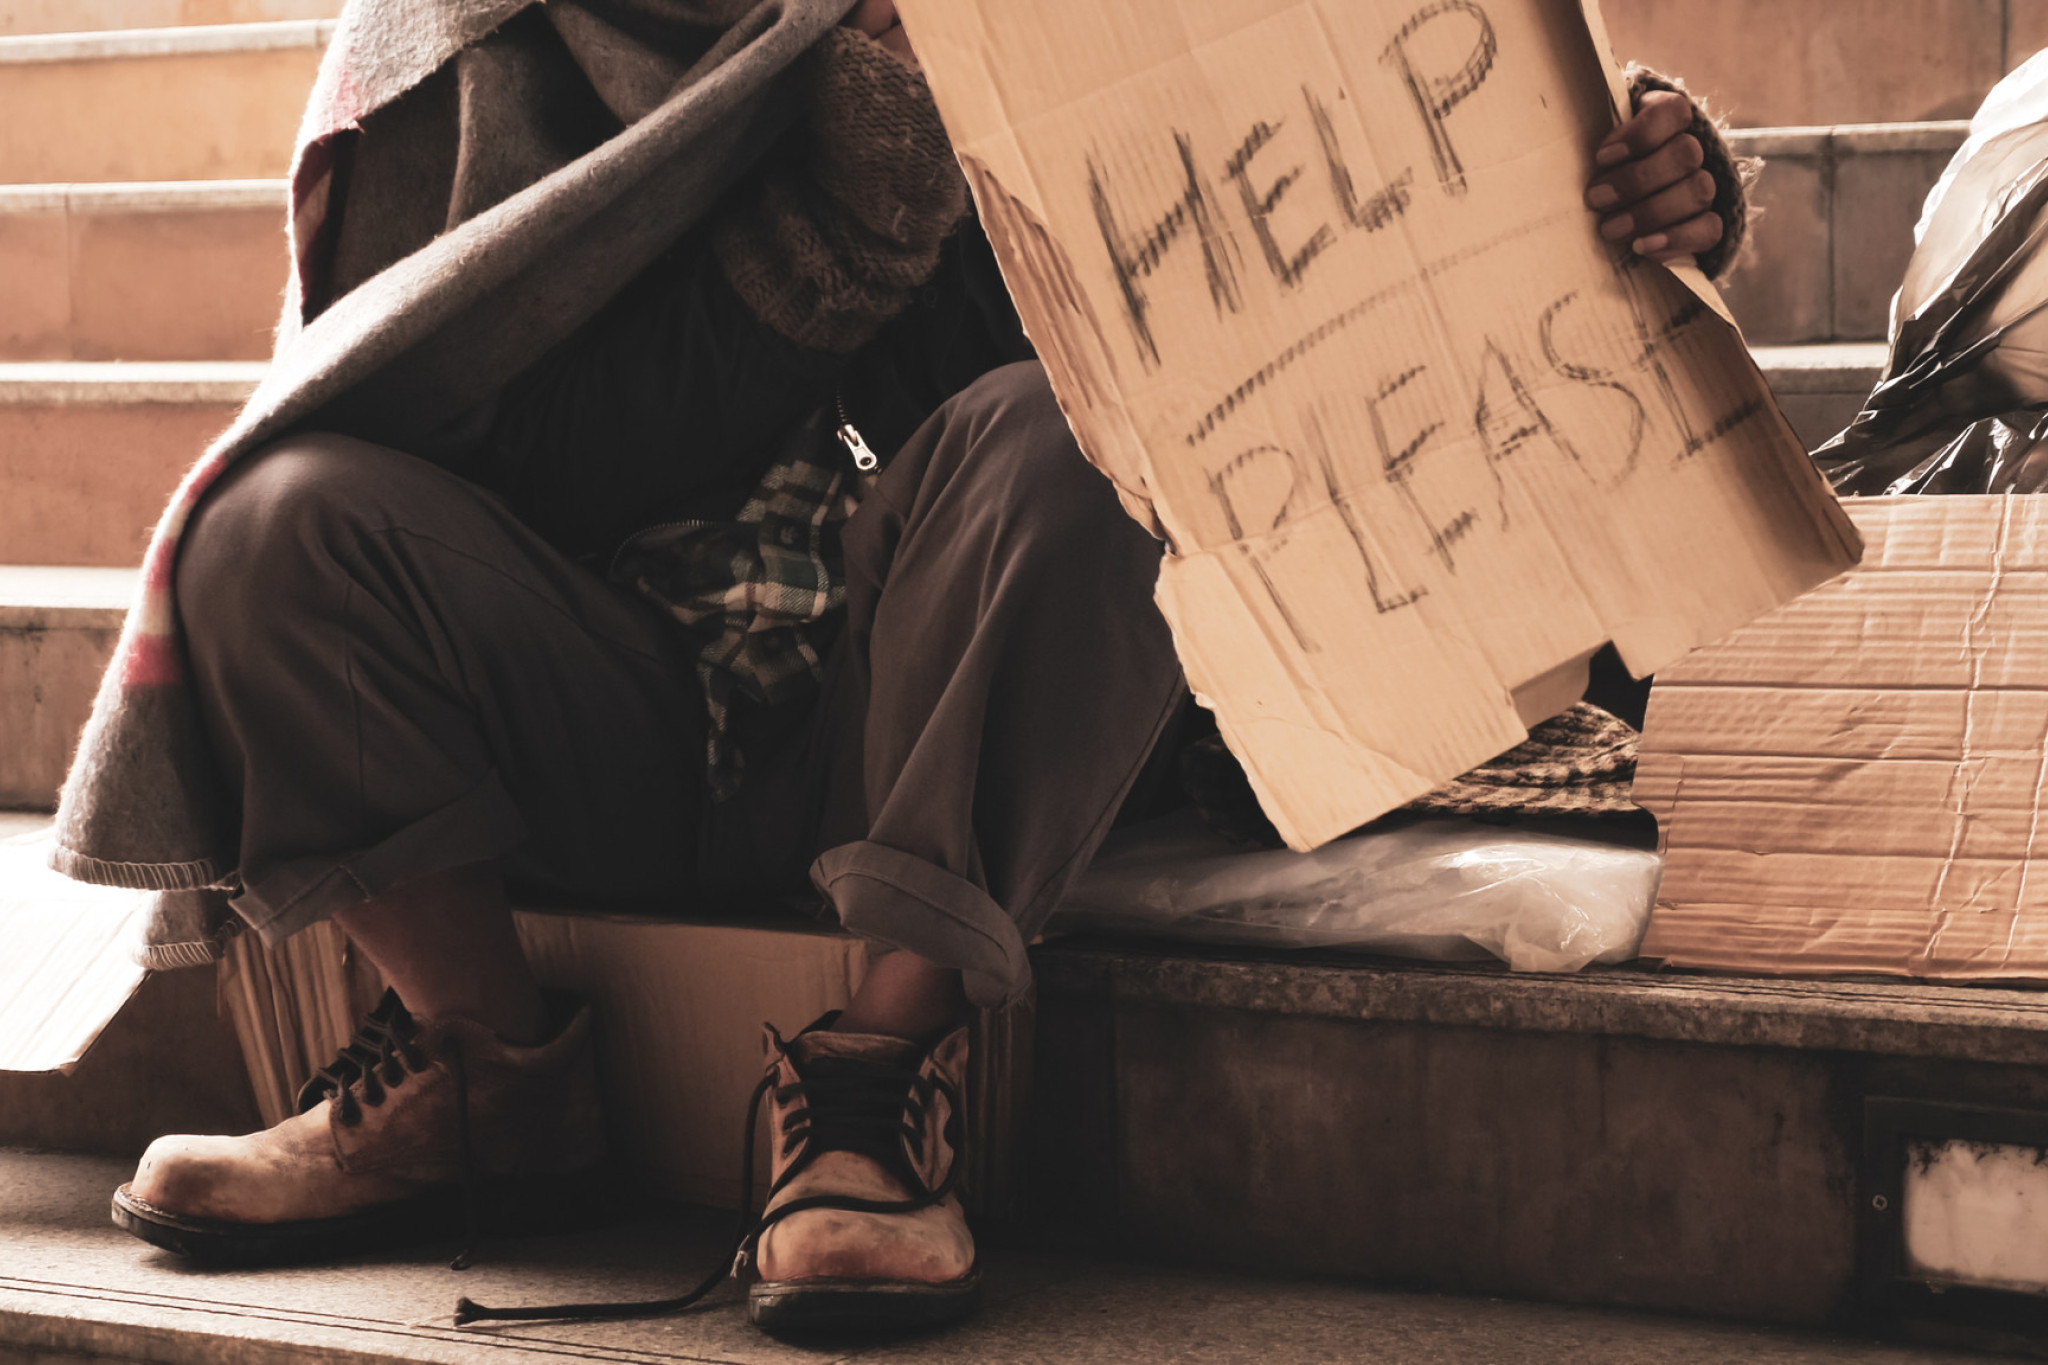 Help Lions help the homeless - feature photo